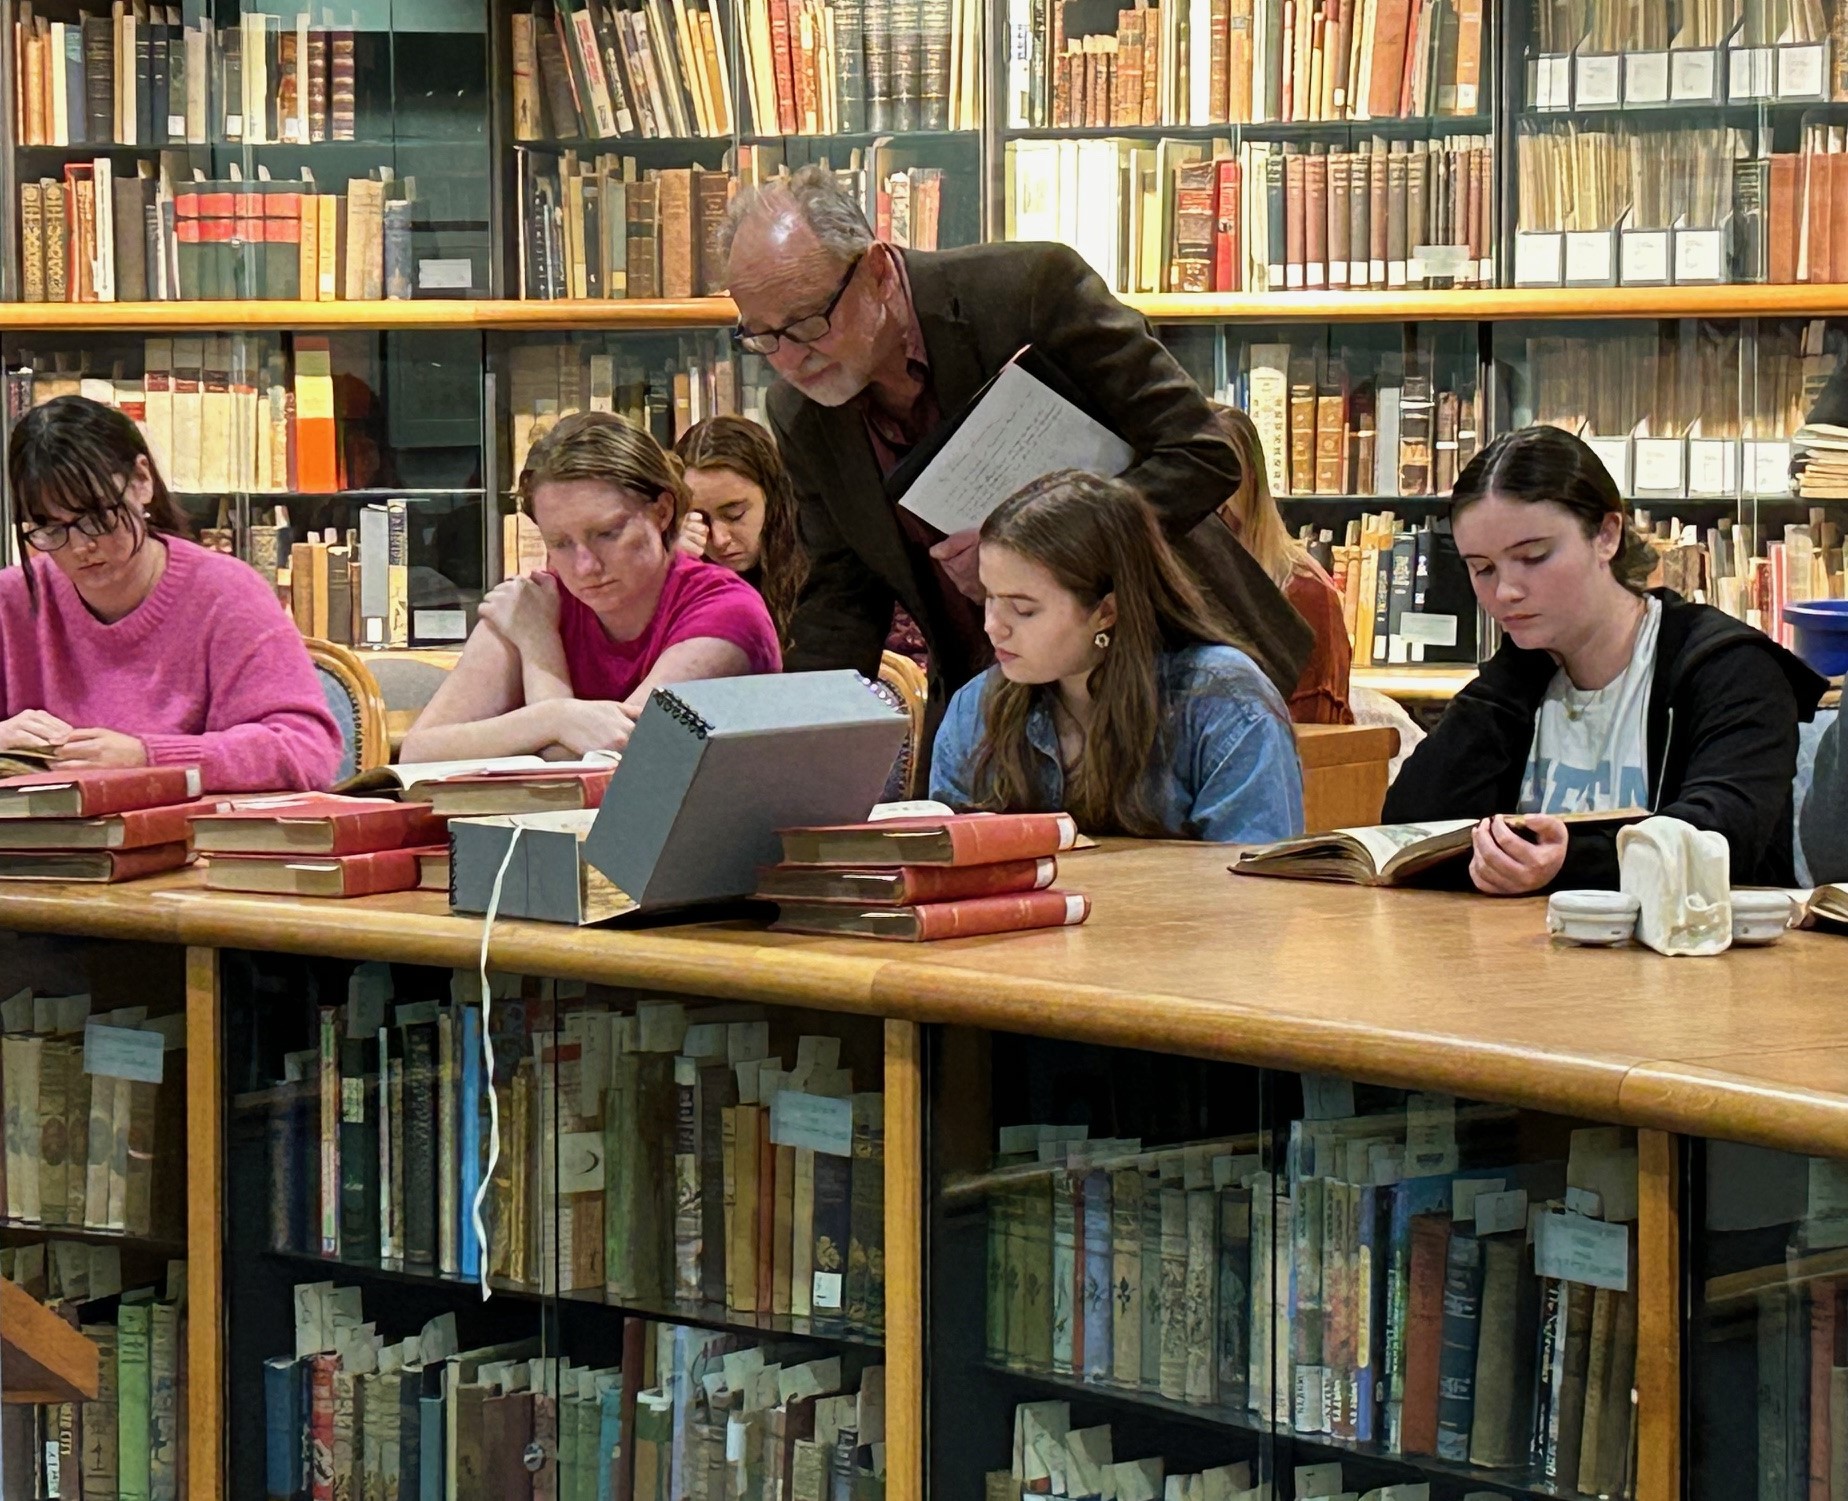 Prof. West and students look at books